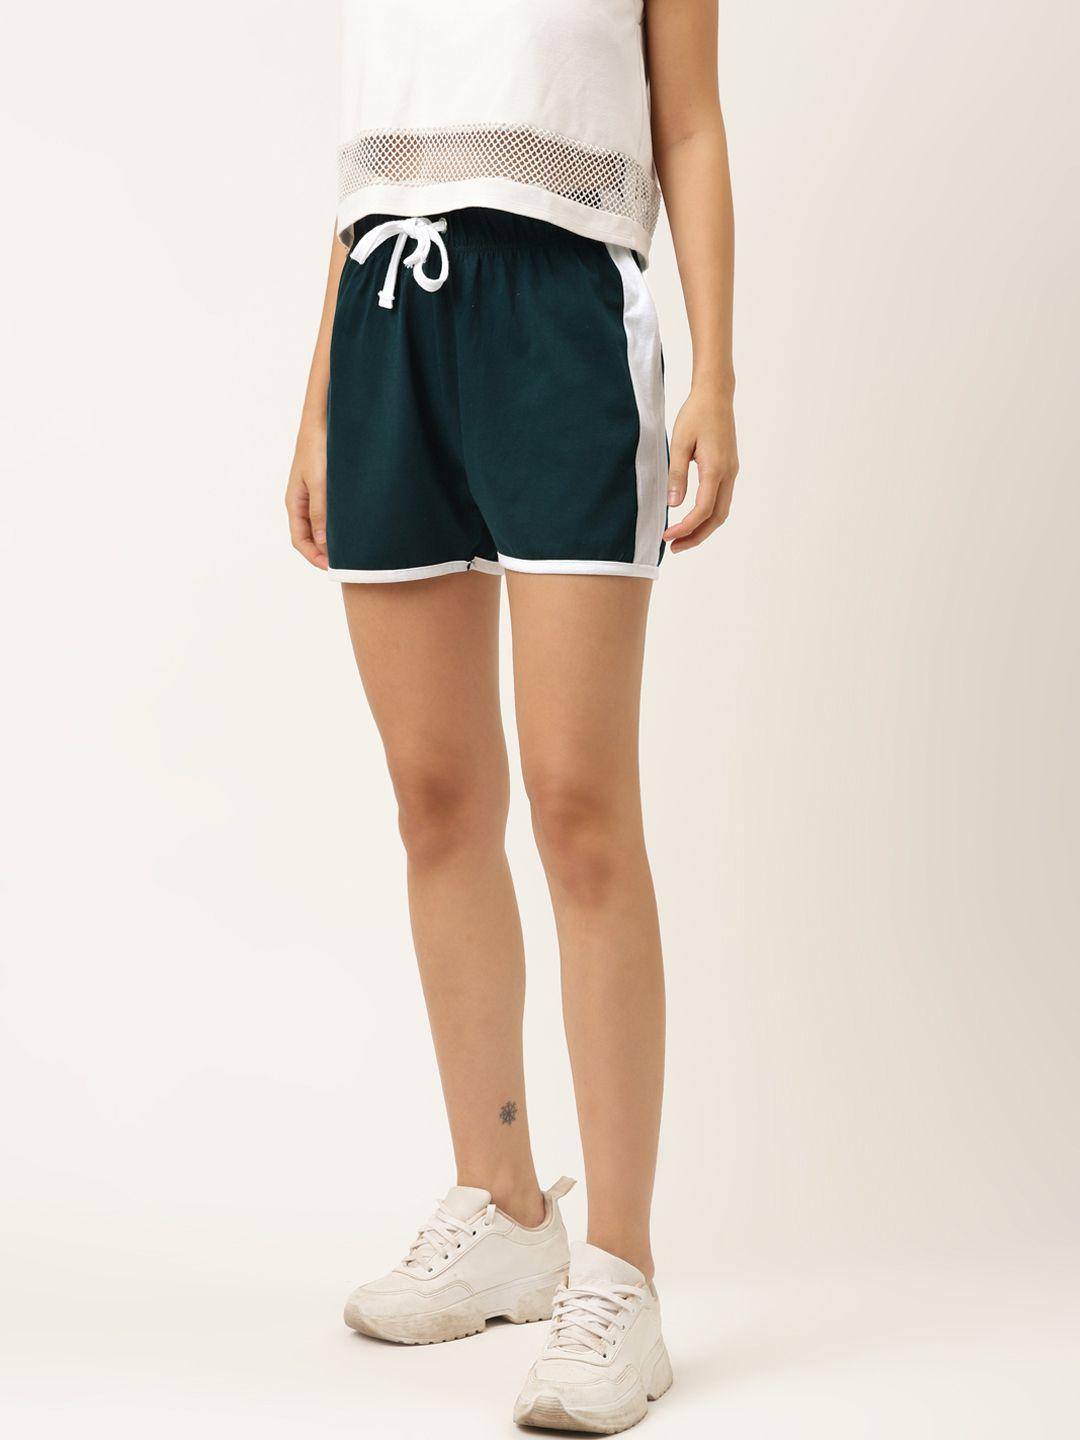 the-dry-state-women-navy-blue-solid-pure-cotton-regular-fit-regular-shorts